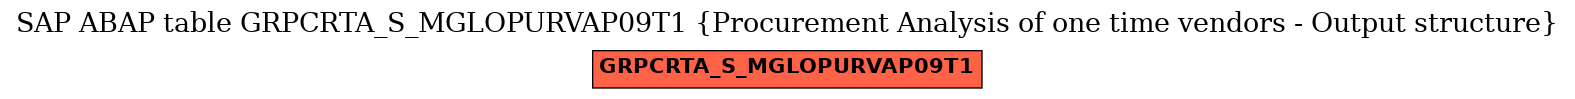 E-R Diagram for table GRPCRTA_S_MGLOPURVAP09T1 (Procurement Analysis of one time vendors - Output structure)